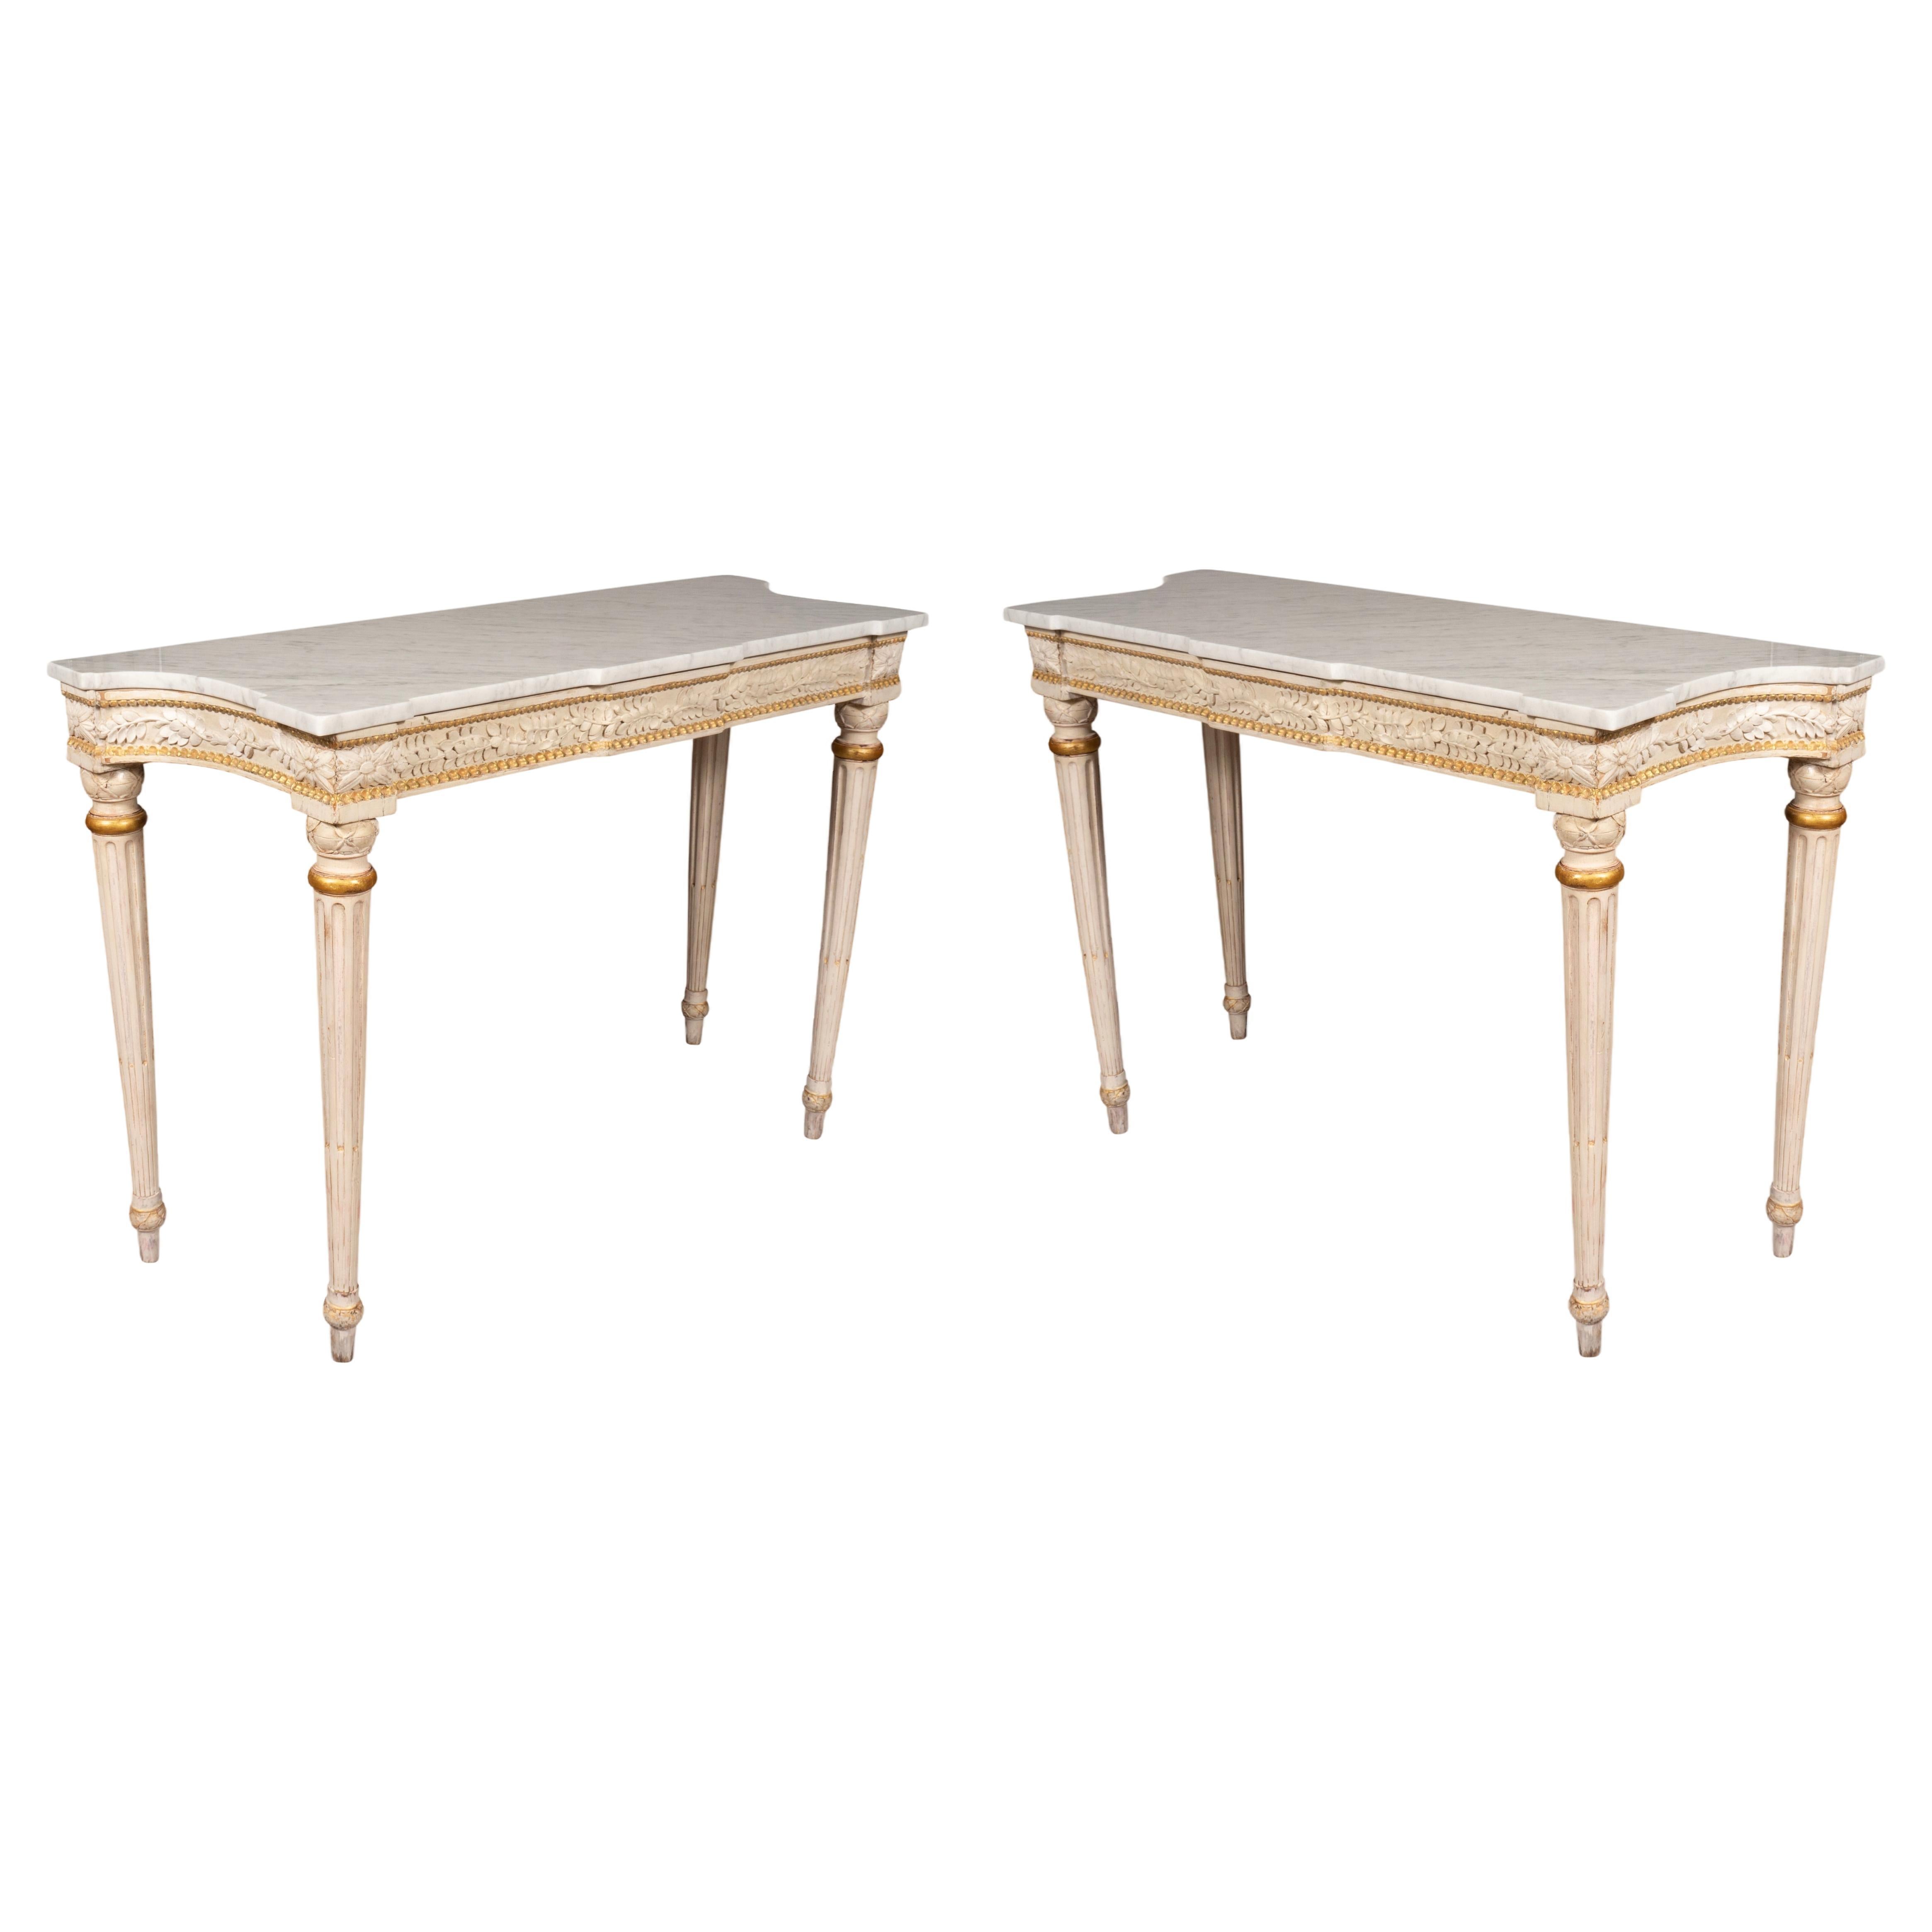 Pair Of Maison Jansen Painted Console Tables From The Waldorf Towers